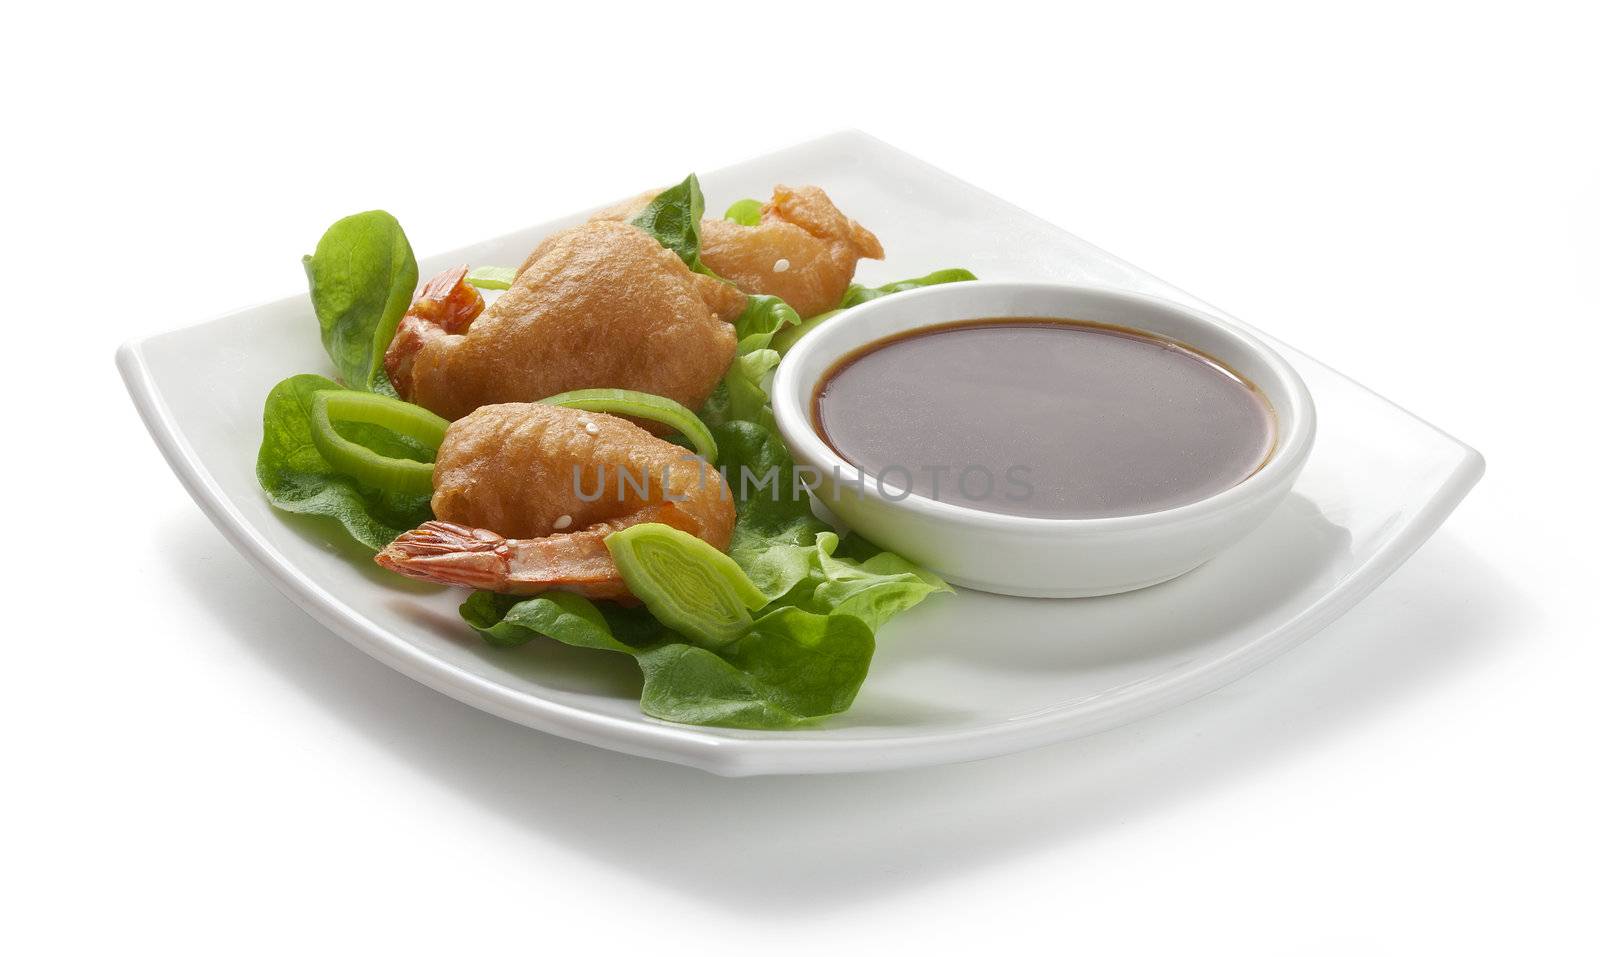 Shrimp tempura with lettuce, leek and soy sauce on the white palate